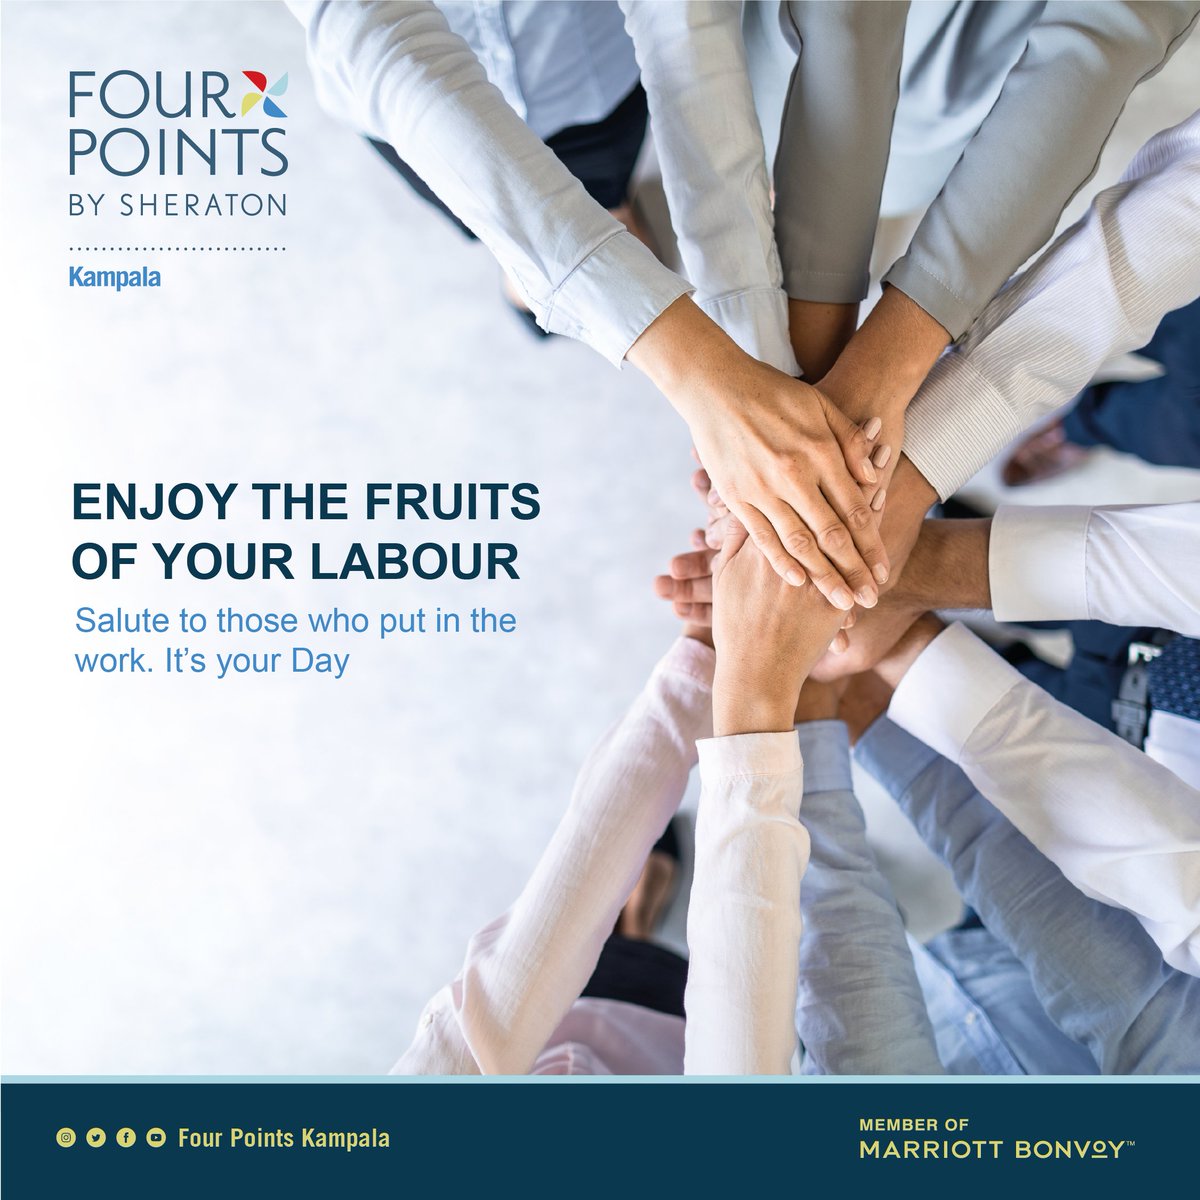 A big thank you to all the hard-working individuals who keep our nation thriving. From Four Points by Sheraton Kampala, we celebrate your dedication! #LabourDay #FourPointsKampala